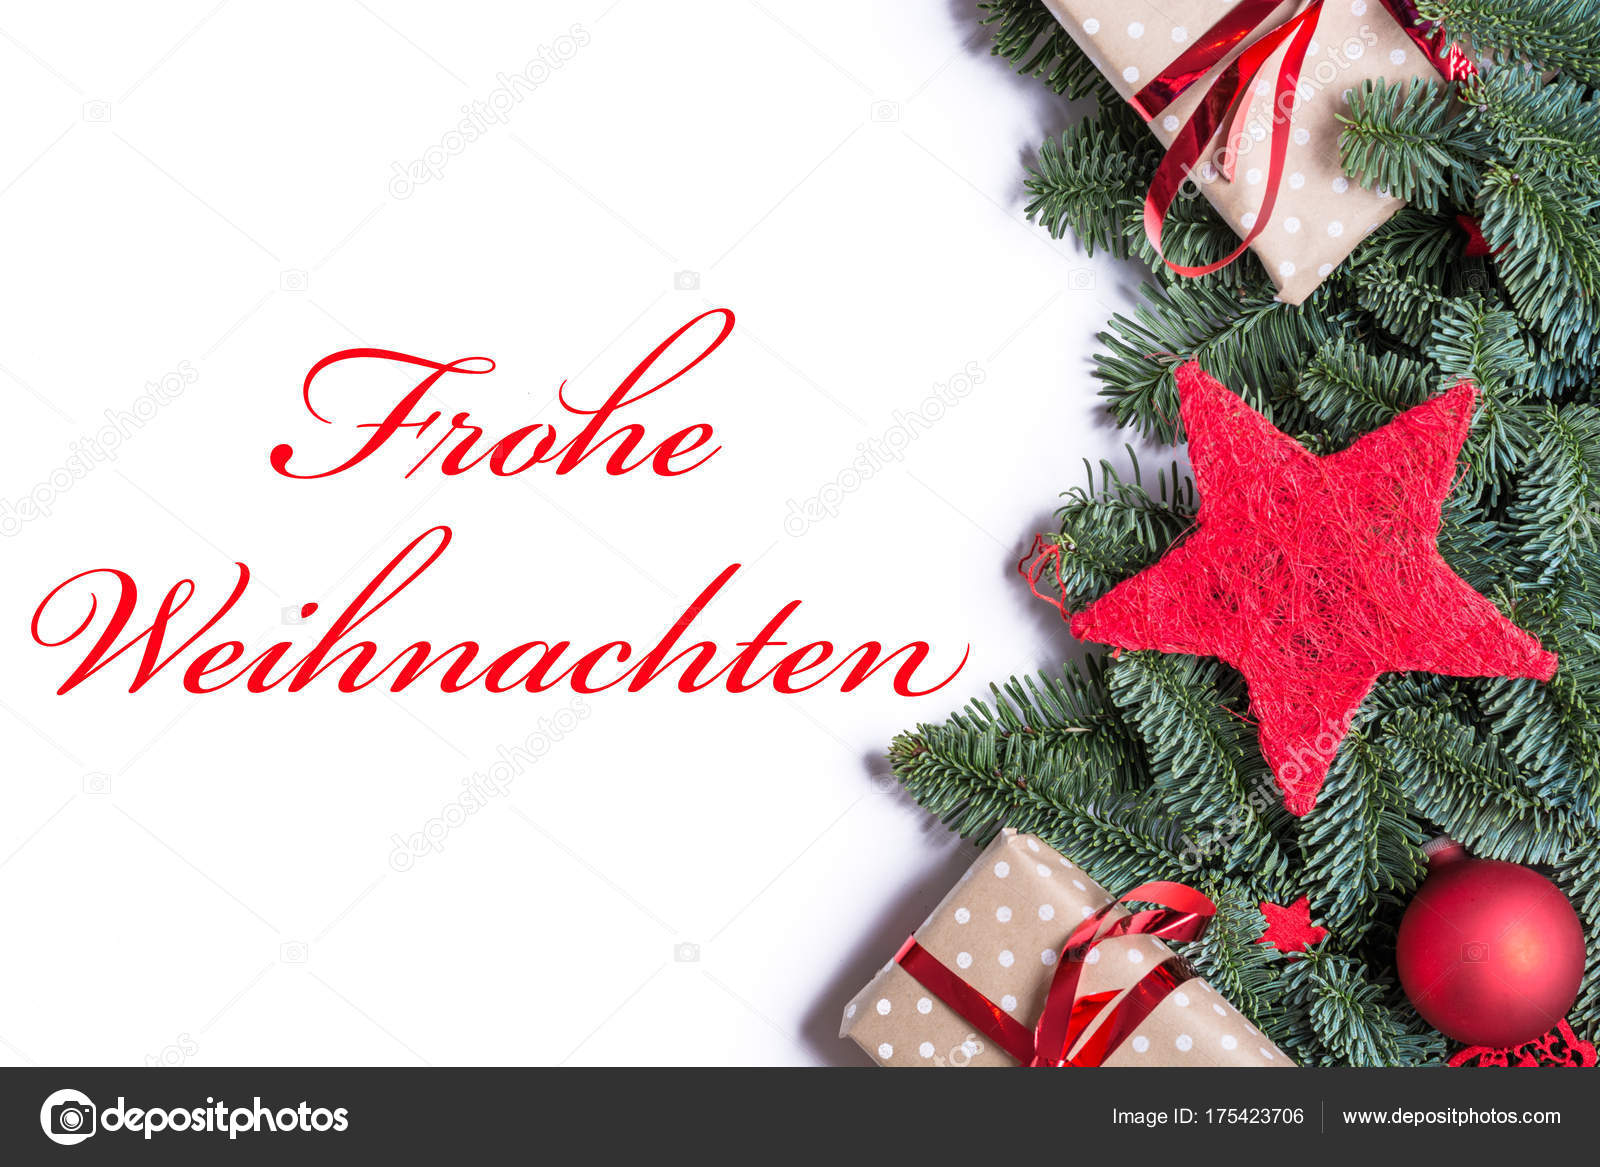 Buon Natale Tedesco.Merry Christmas In German In Red On A Christmas Background Borde Stock Photo C Asvolas 175423706